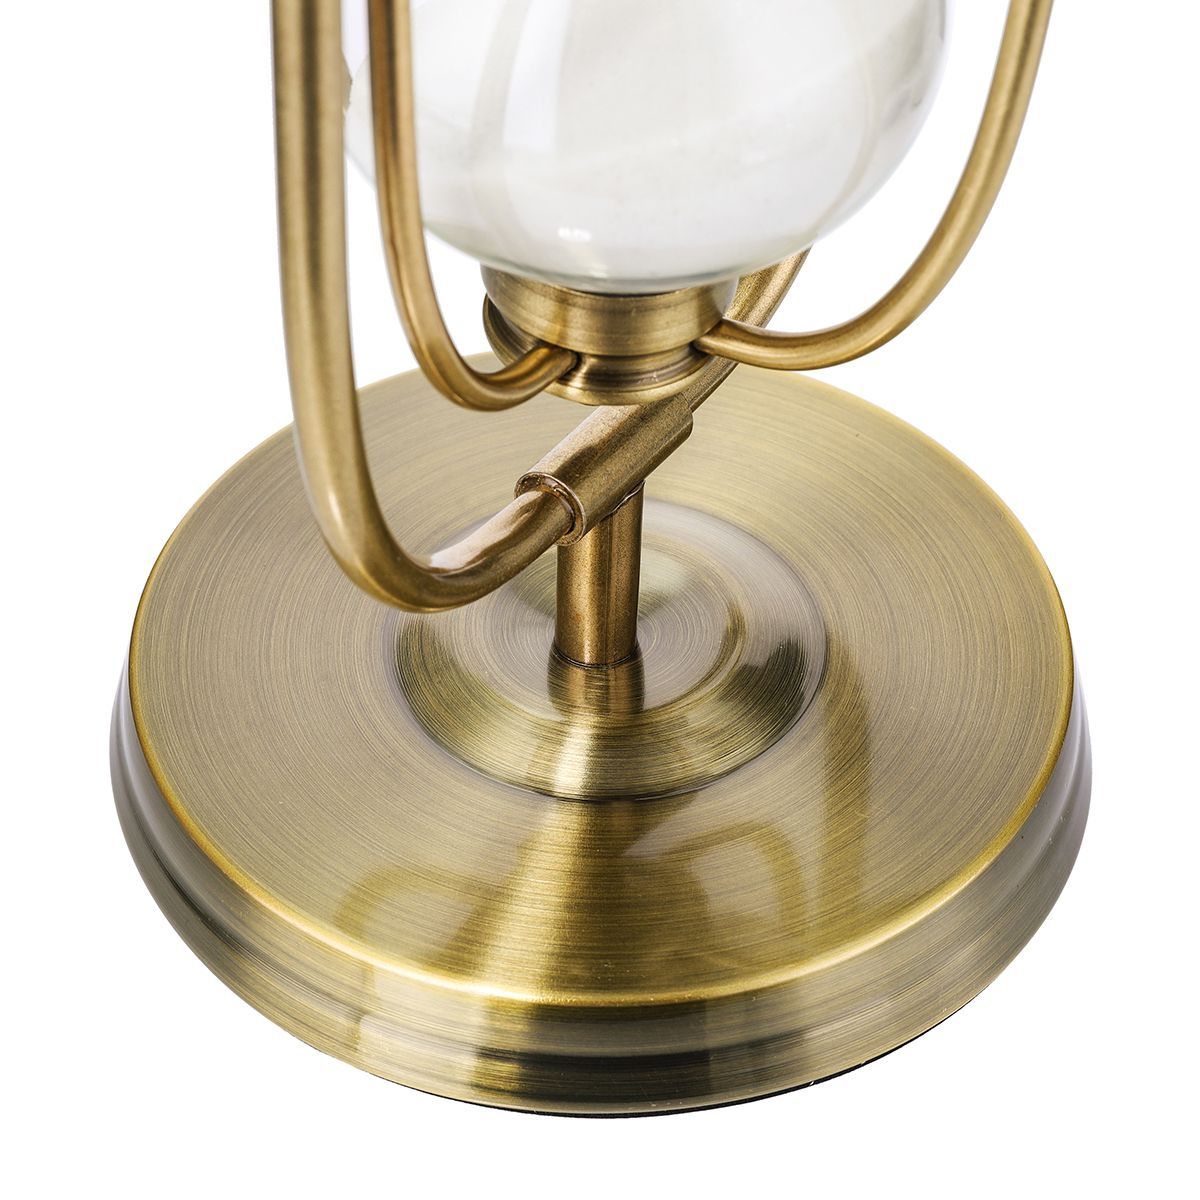 60Min-Hourglass-Timer-Bronze-Rotation-Sand-glass-Countdown-Home-Office-Decorations-1460347